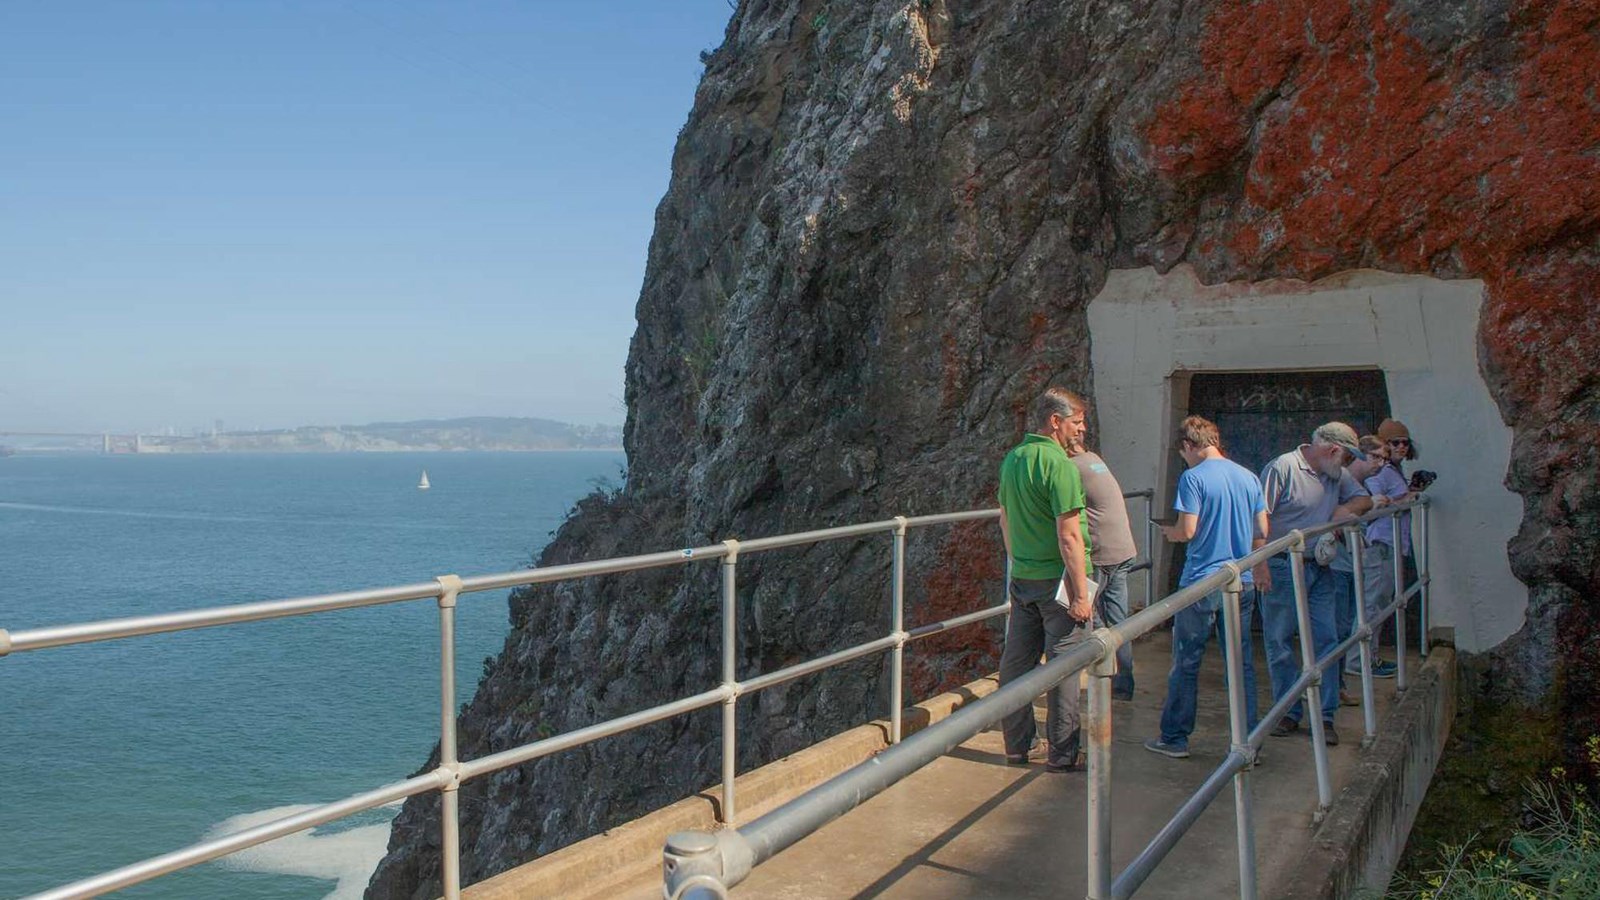 Visitors approaching the tunnel entrance from the north.